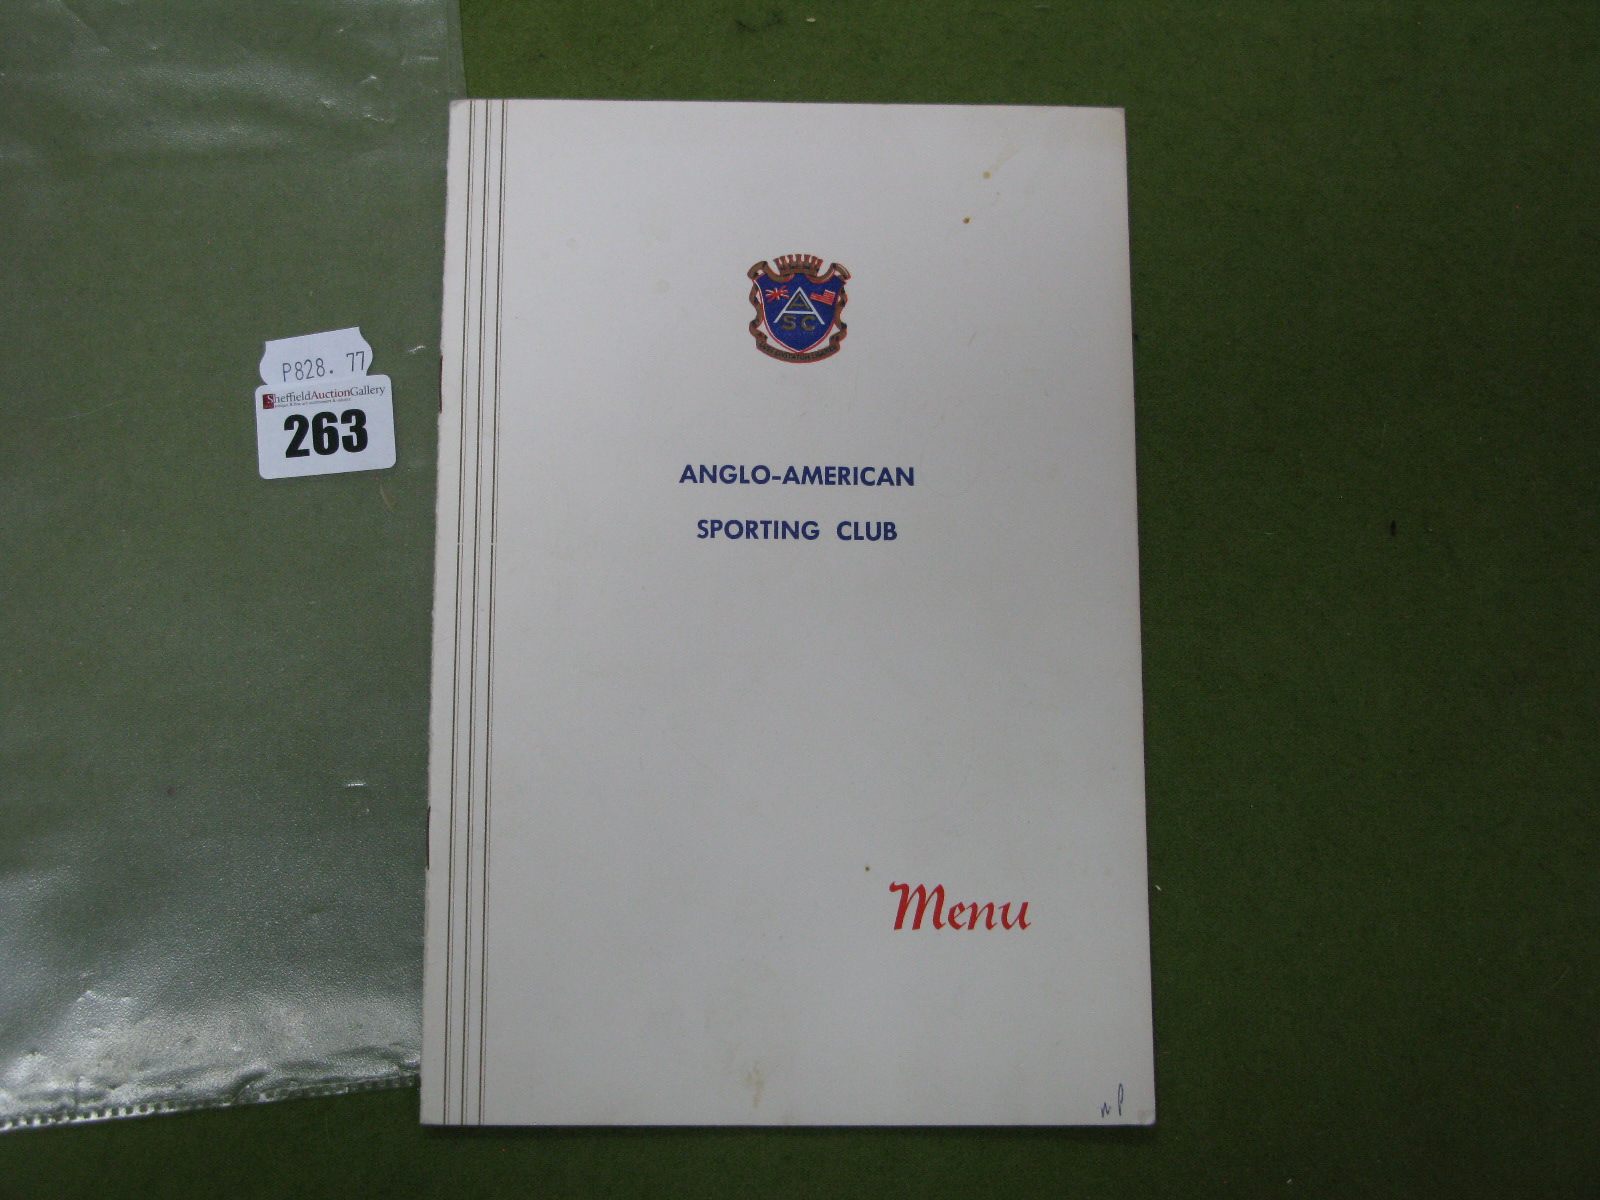 Anglo-American Sporting Club Menu, Monday 17th March, 1975 in honour of Emlyn Hughes, ink signed